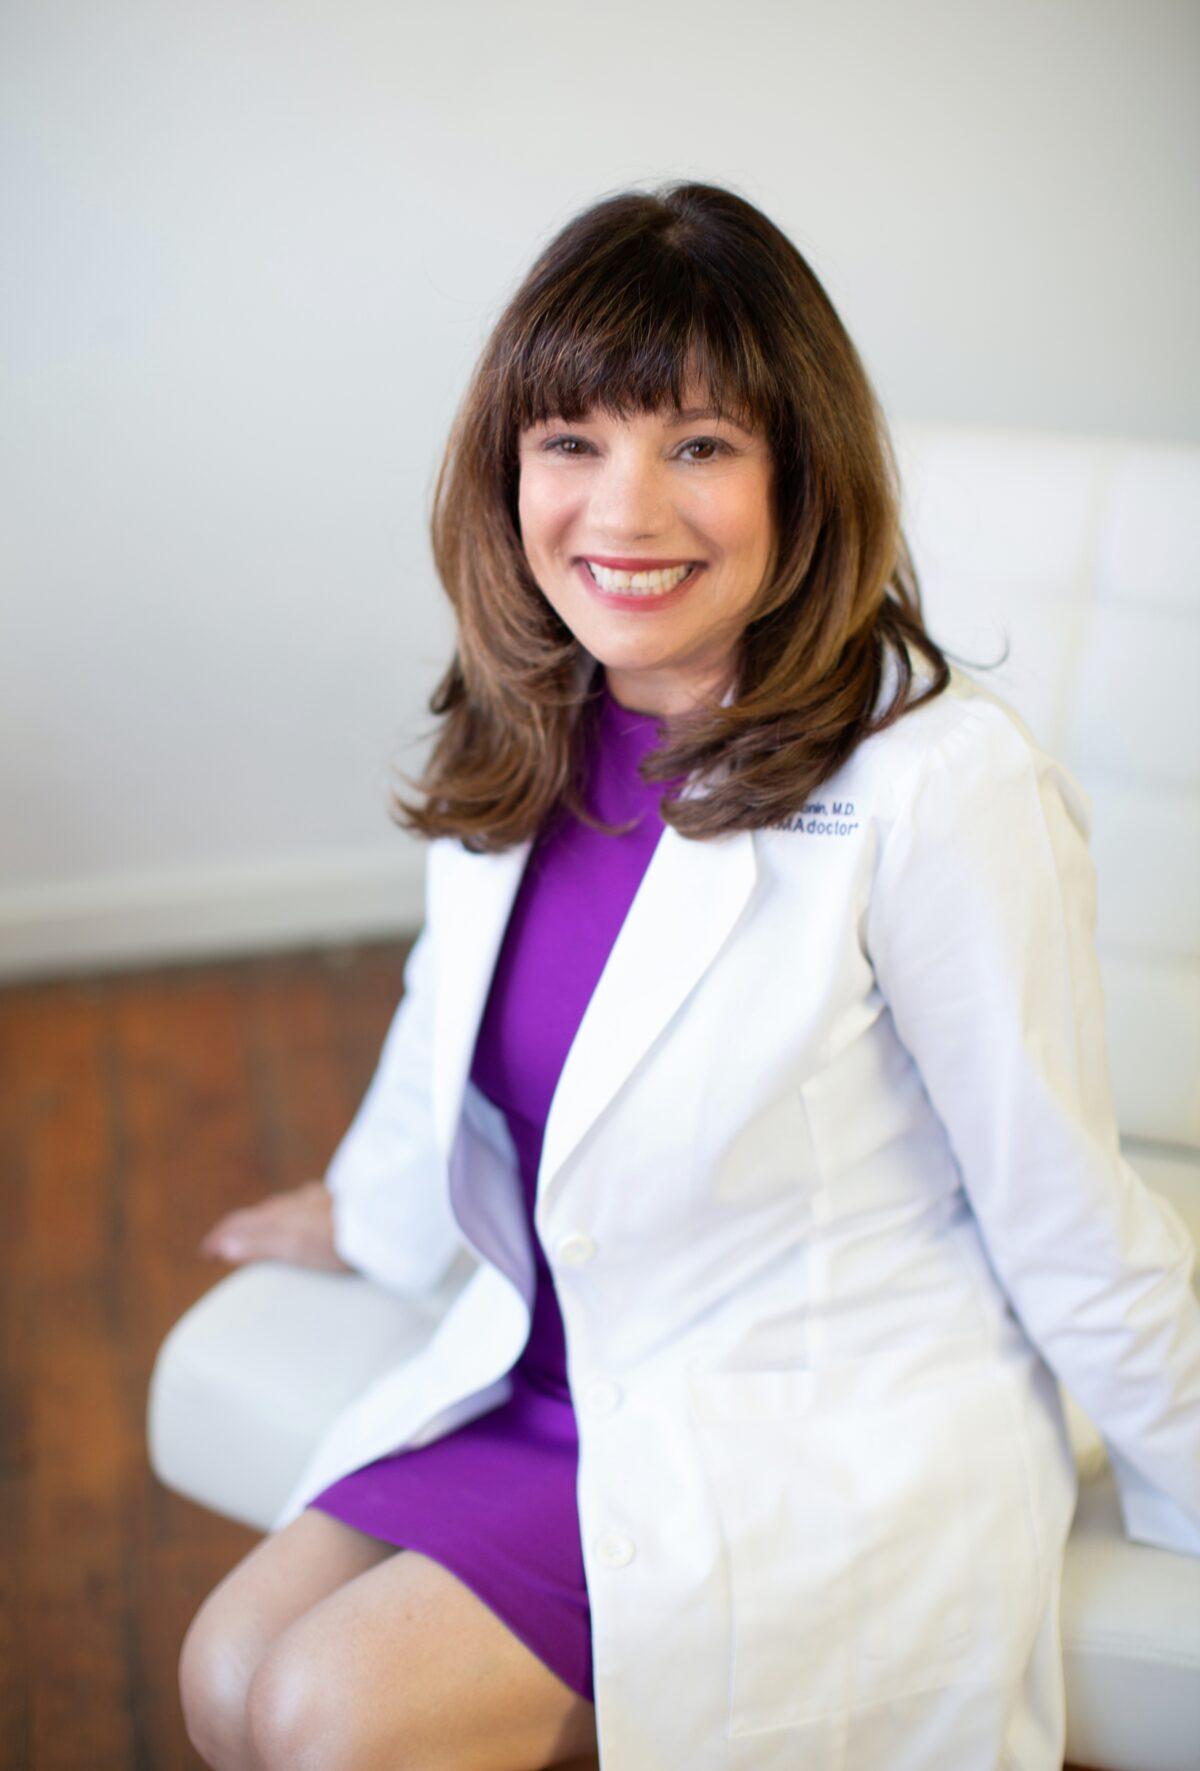 Dr. Kunin is a dermatologist in Kansas City, Missouri. She is also an author and founder of DERMAdoctor. (Courtesy of Dr. Kunin)